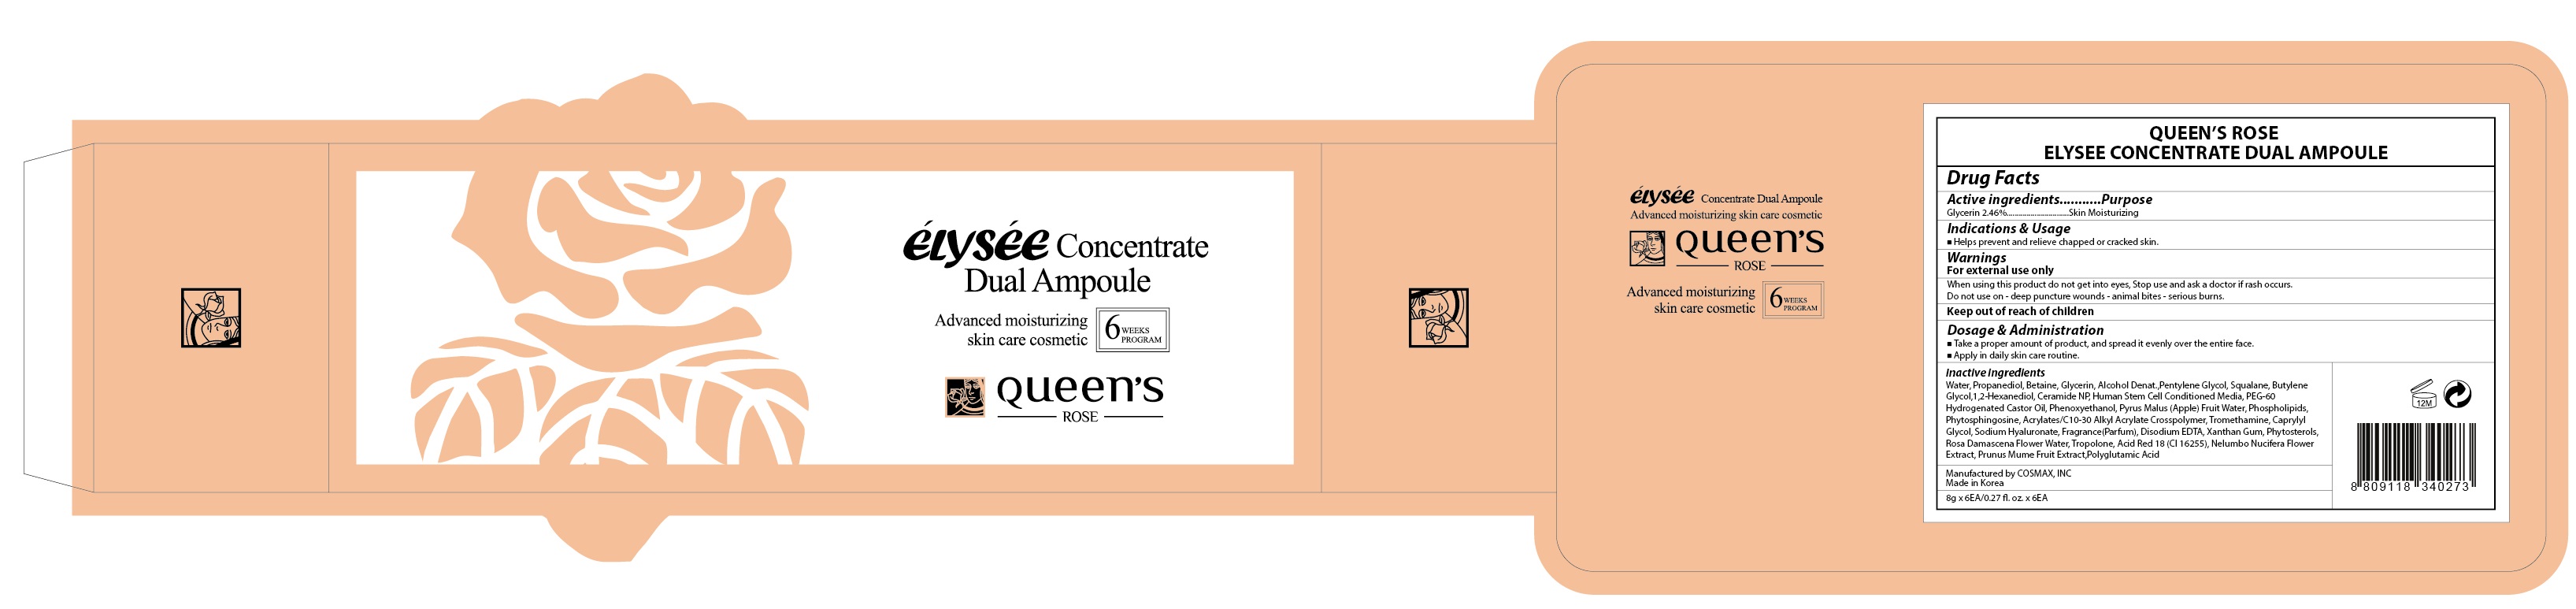 Queens Rose Elysee Concen Trate Dual Ampoule | Glycerin Liquid while Breastfeeding